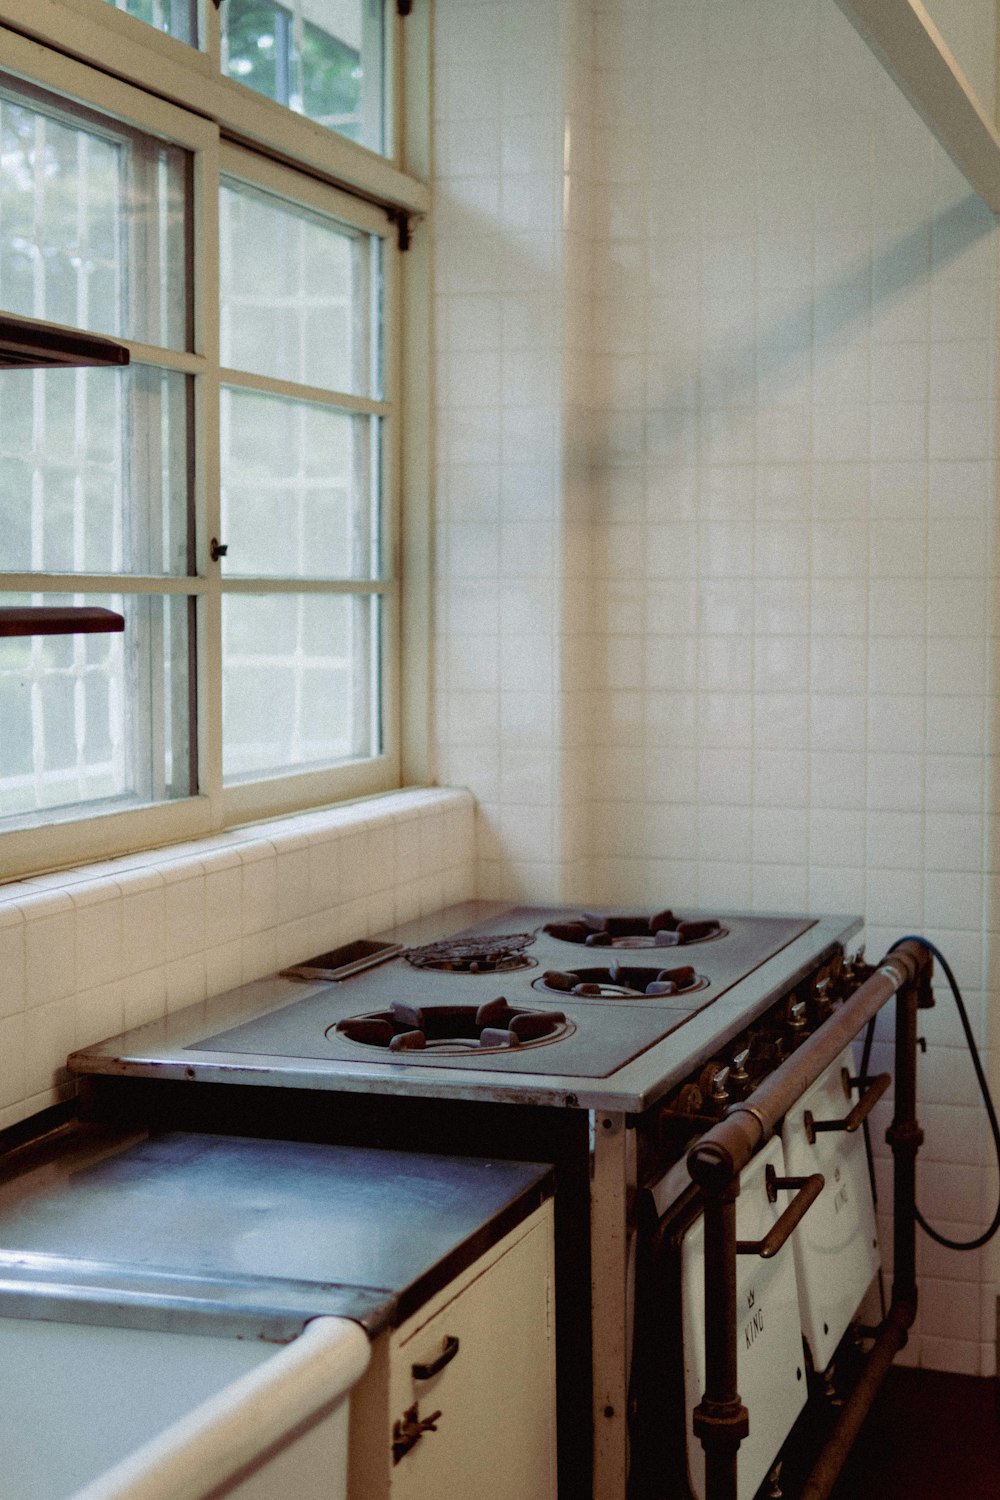 a stove top oven sitting in a kitchen next to a window